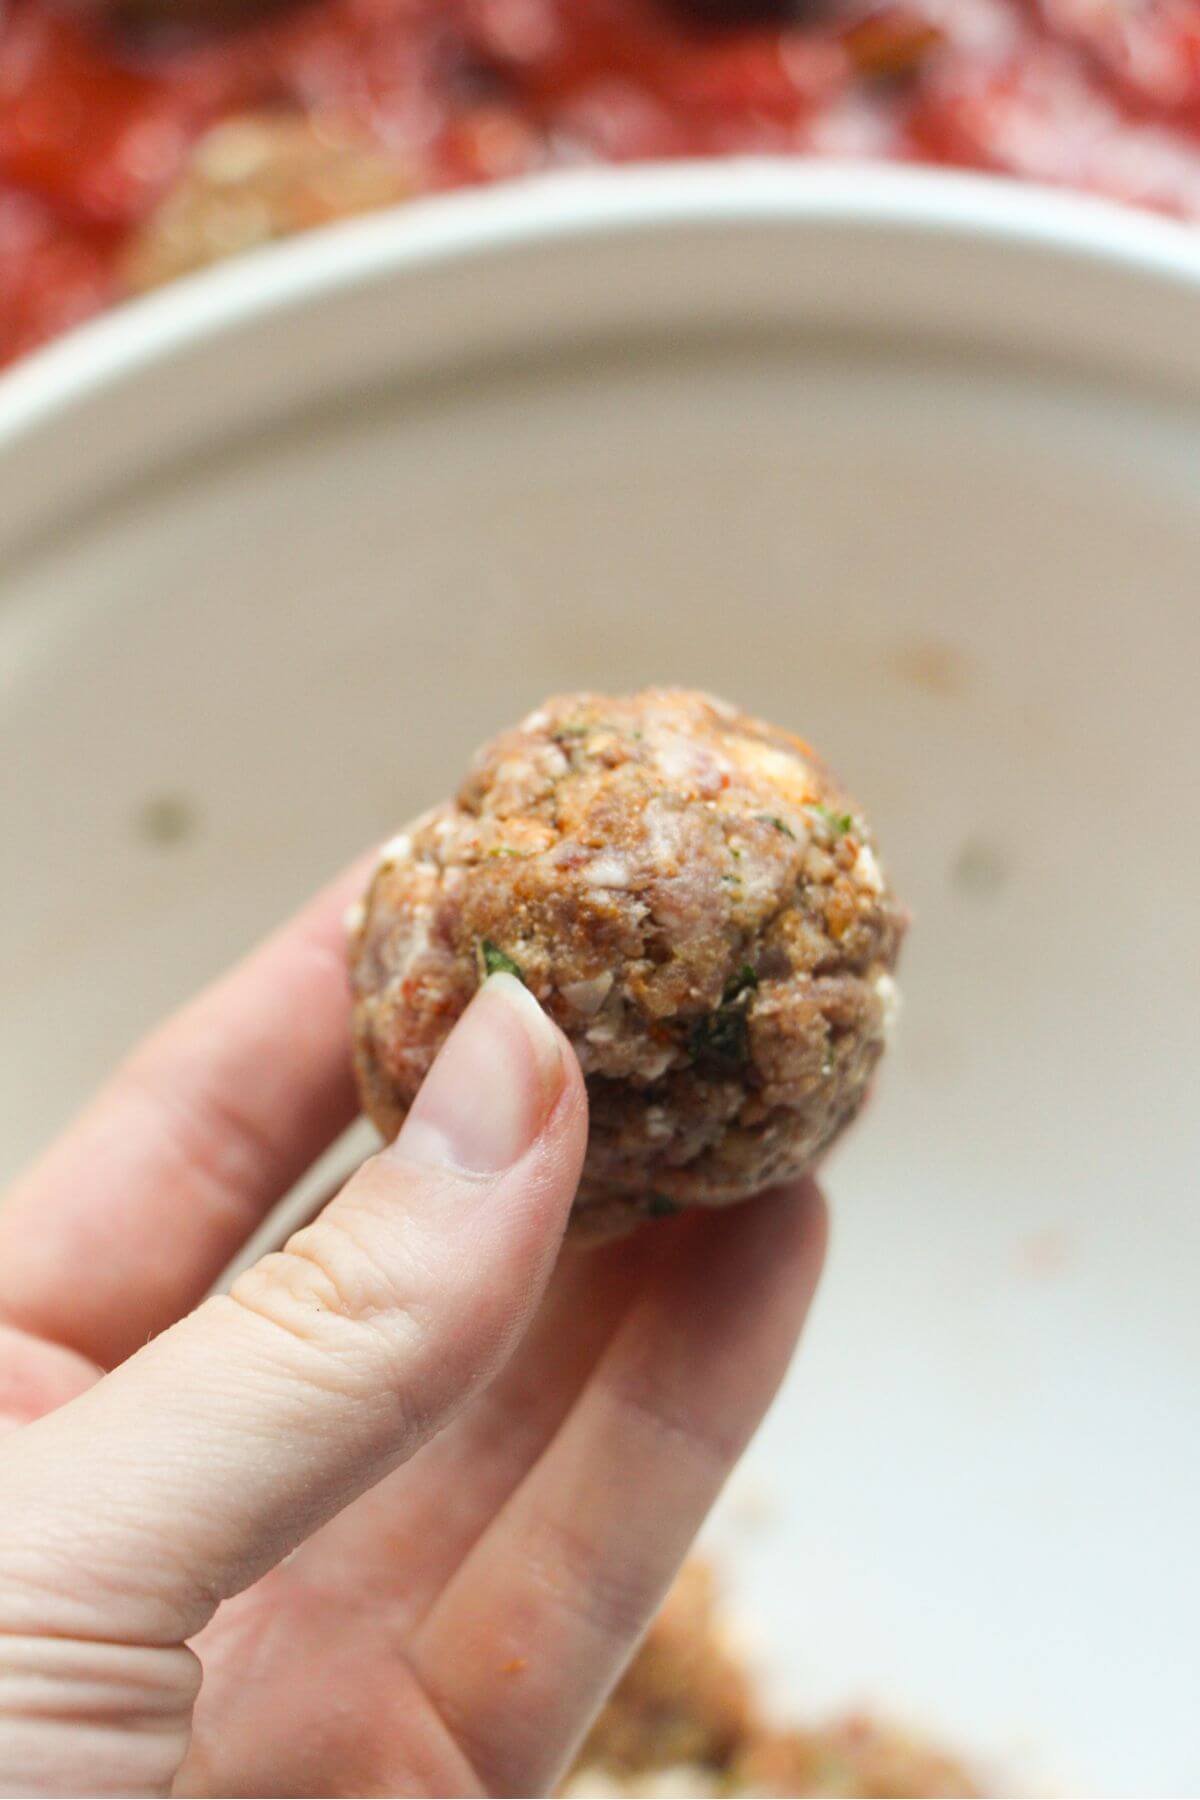 Hand holding a formed meatball, with white mixing bowl in the background.